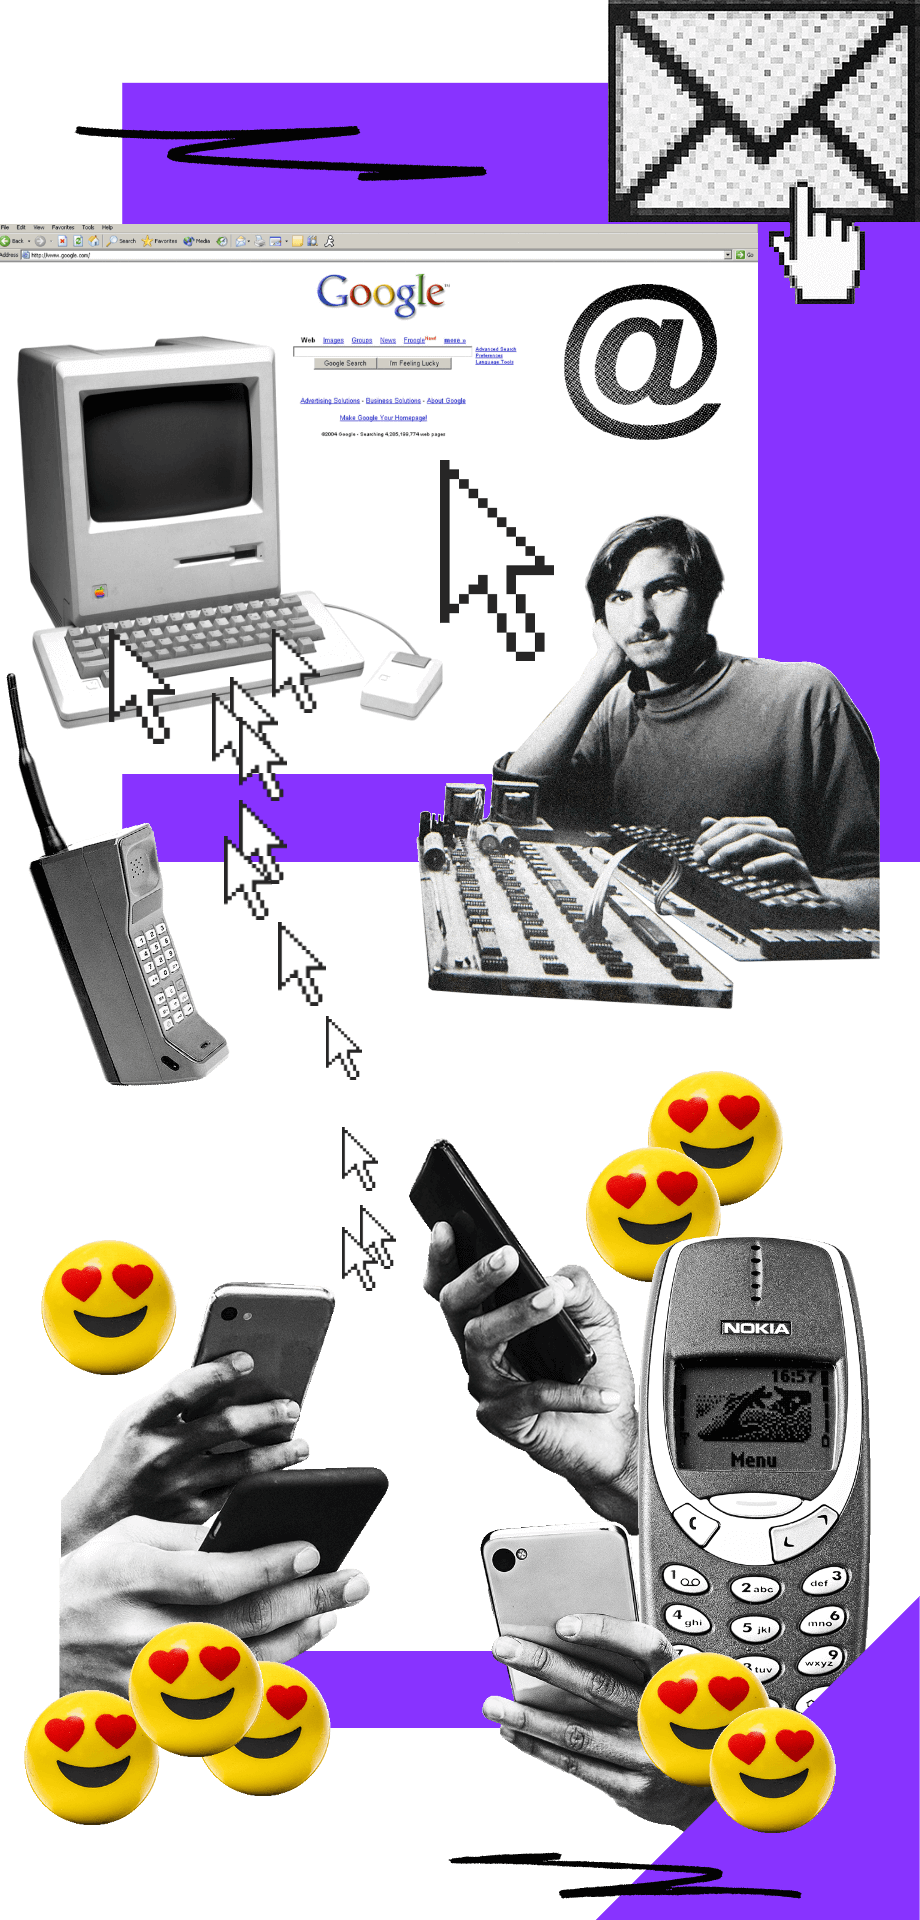 Composite image of 80s Mac computer, cell phones from different eras, Google and the World Wide Web, email icon, Steve Jobs and heart eyes emojis